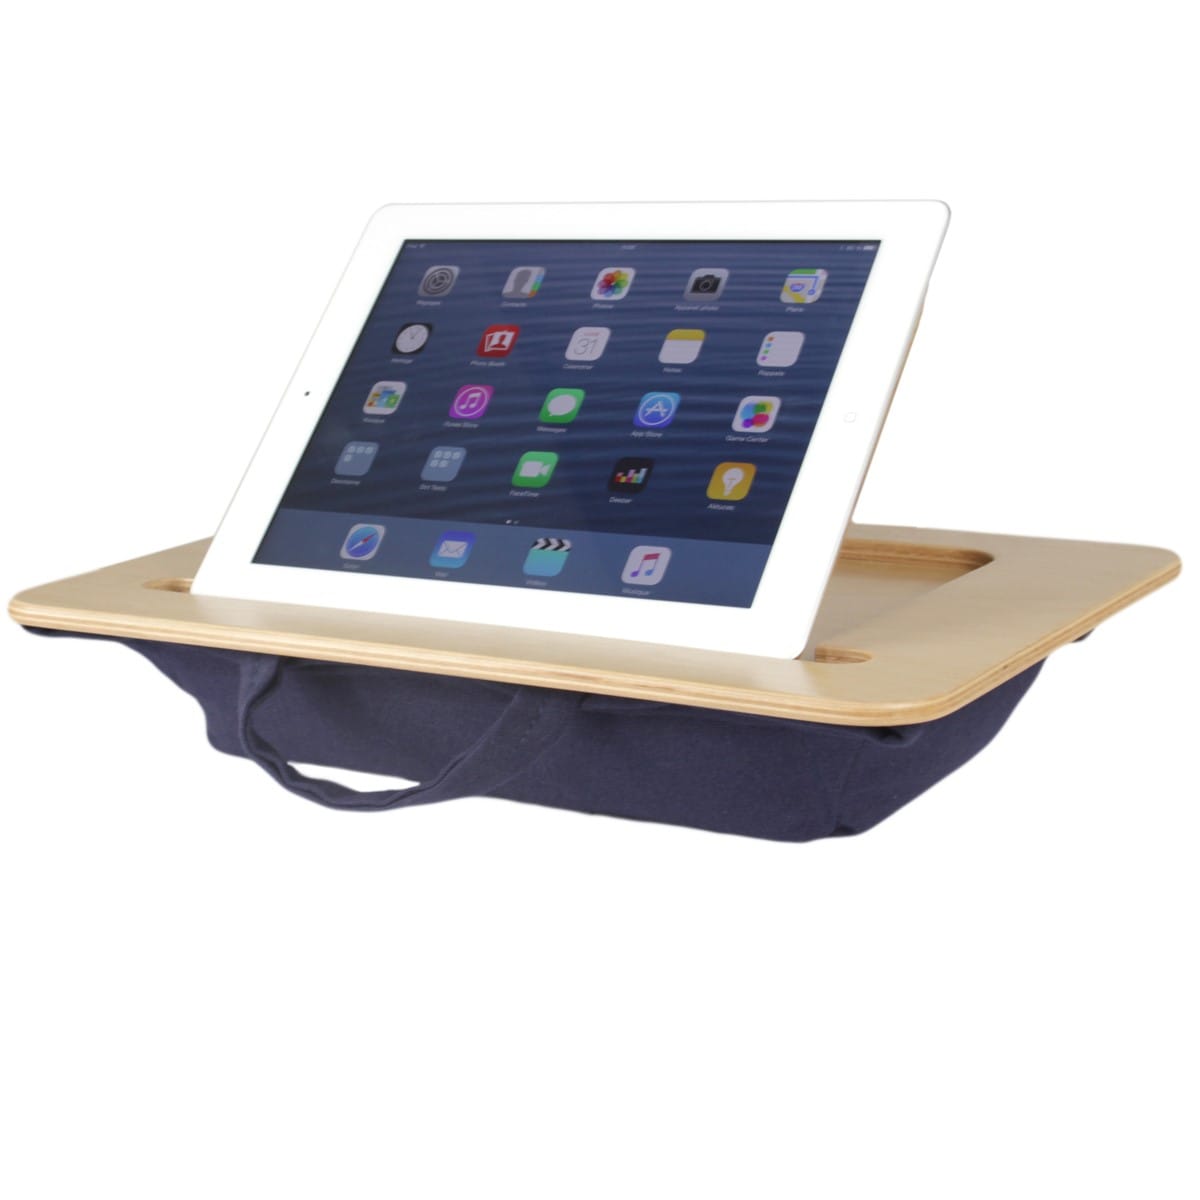 Plateau support tablette - 10,36 €